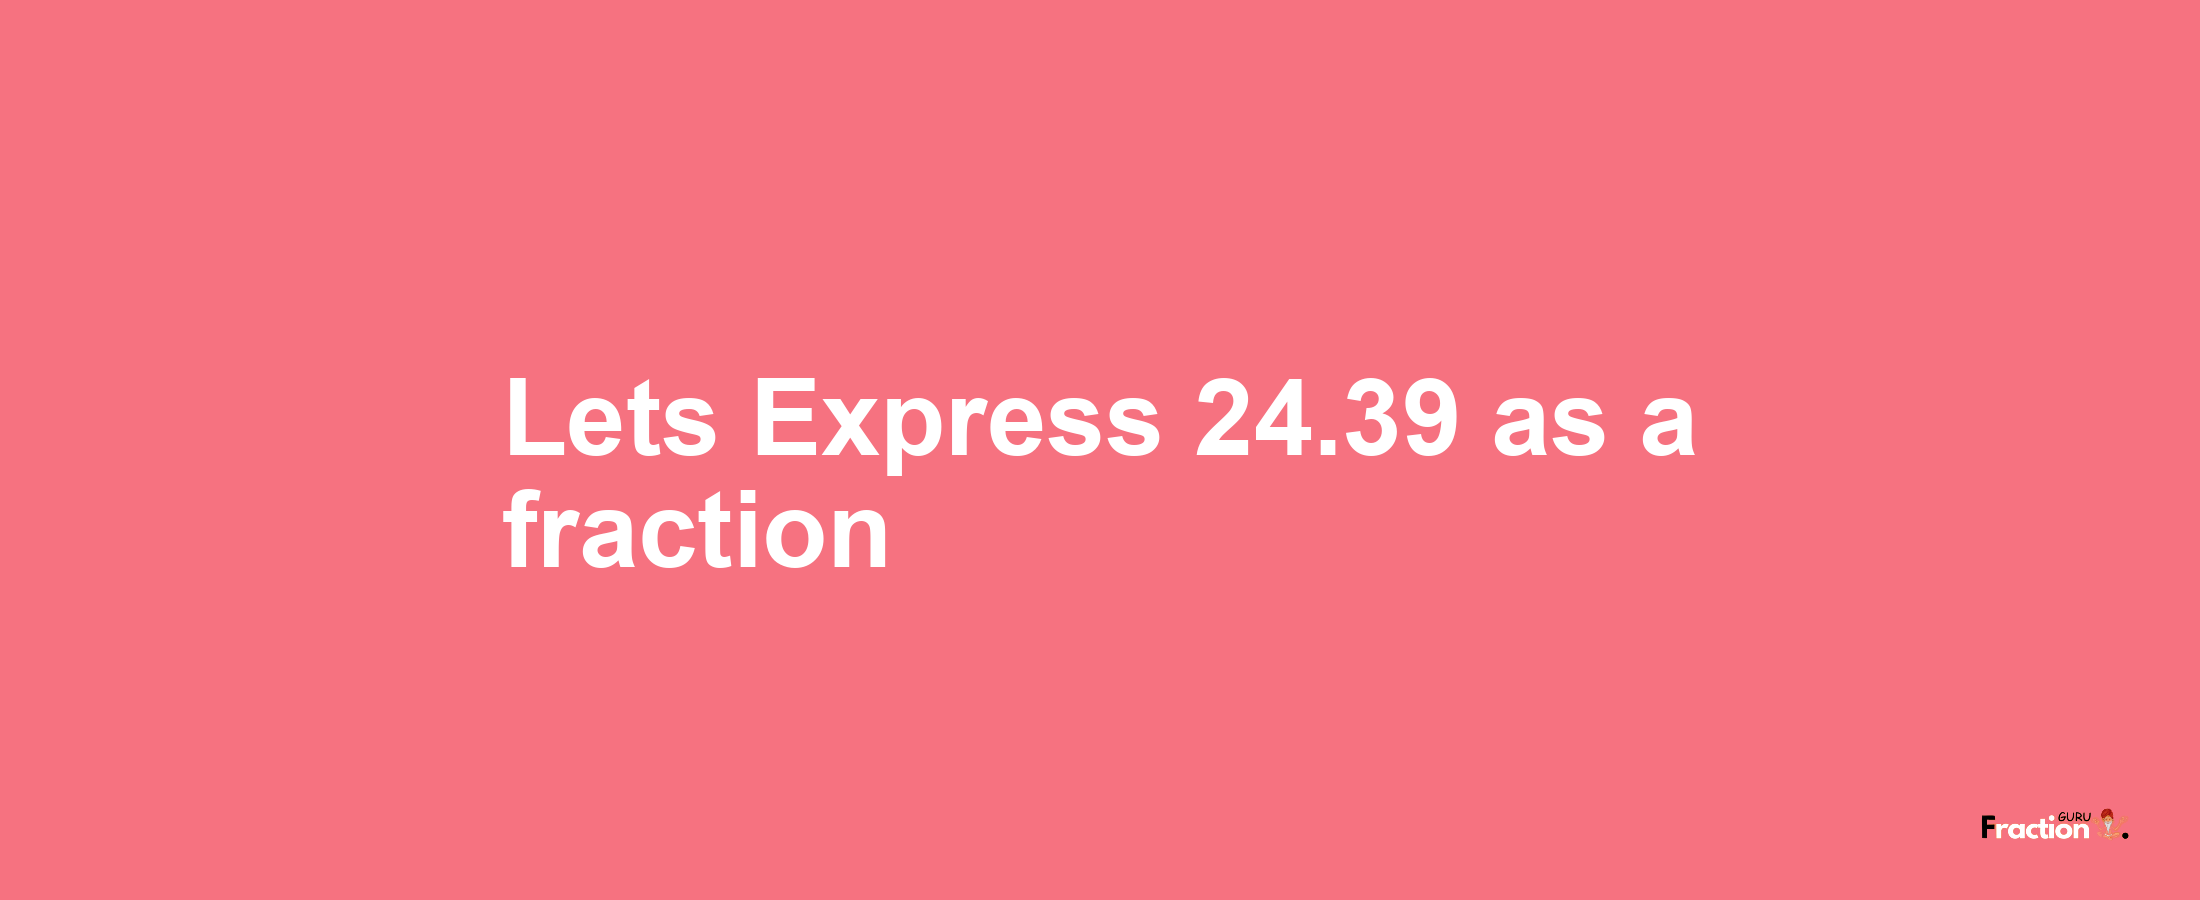 Lets Express 24.39 as afraction